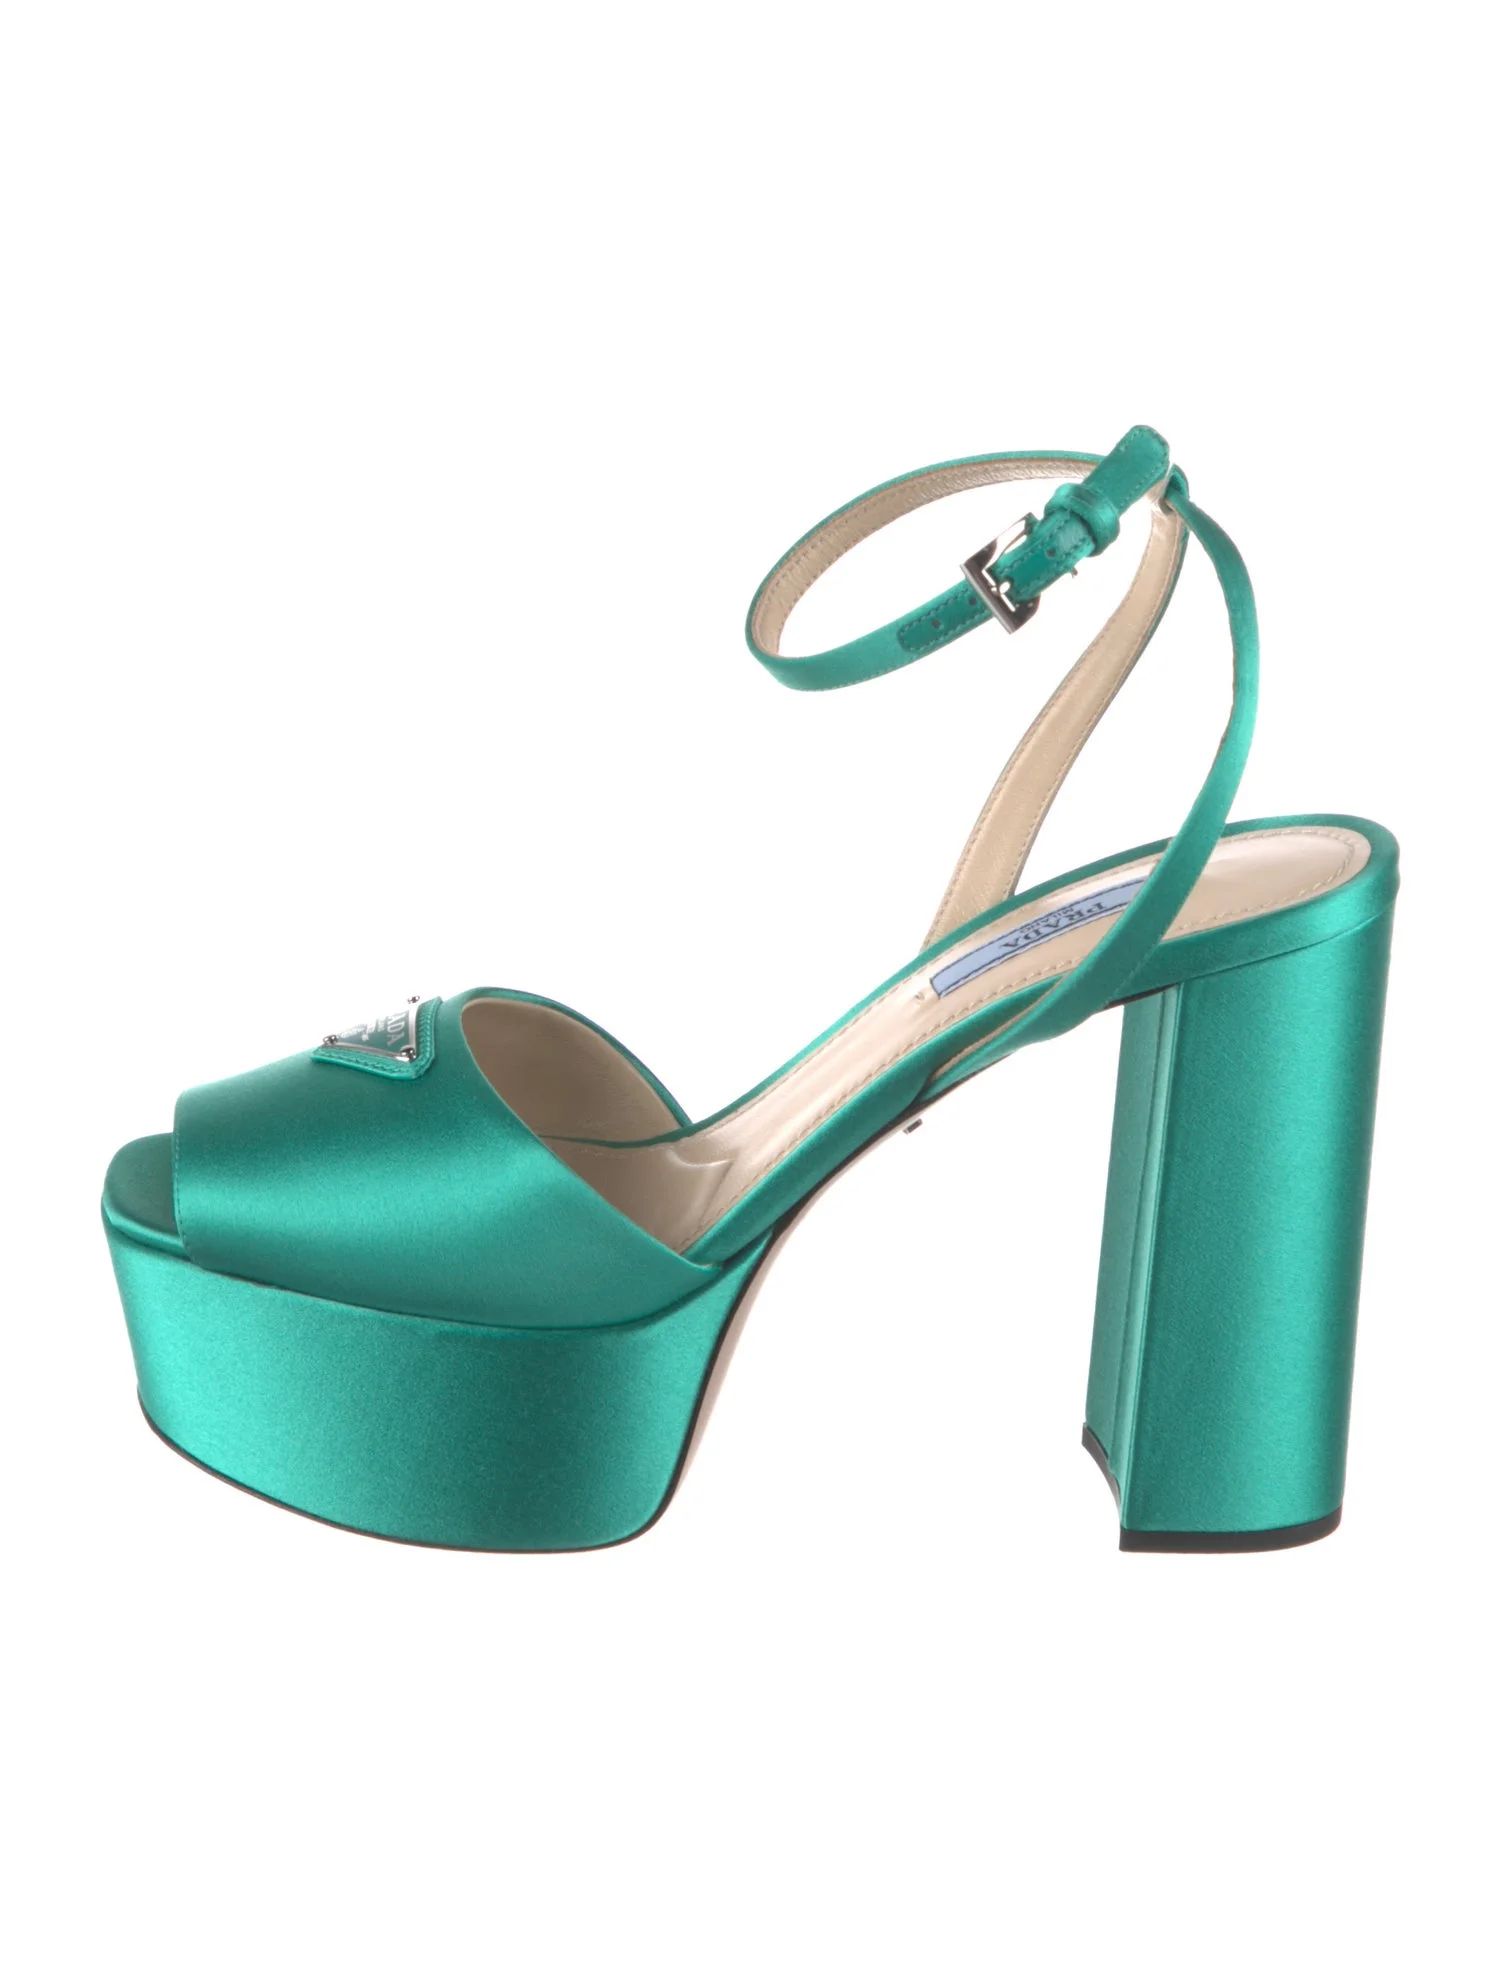 Satin Sandals | The RealReal